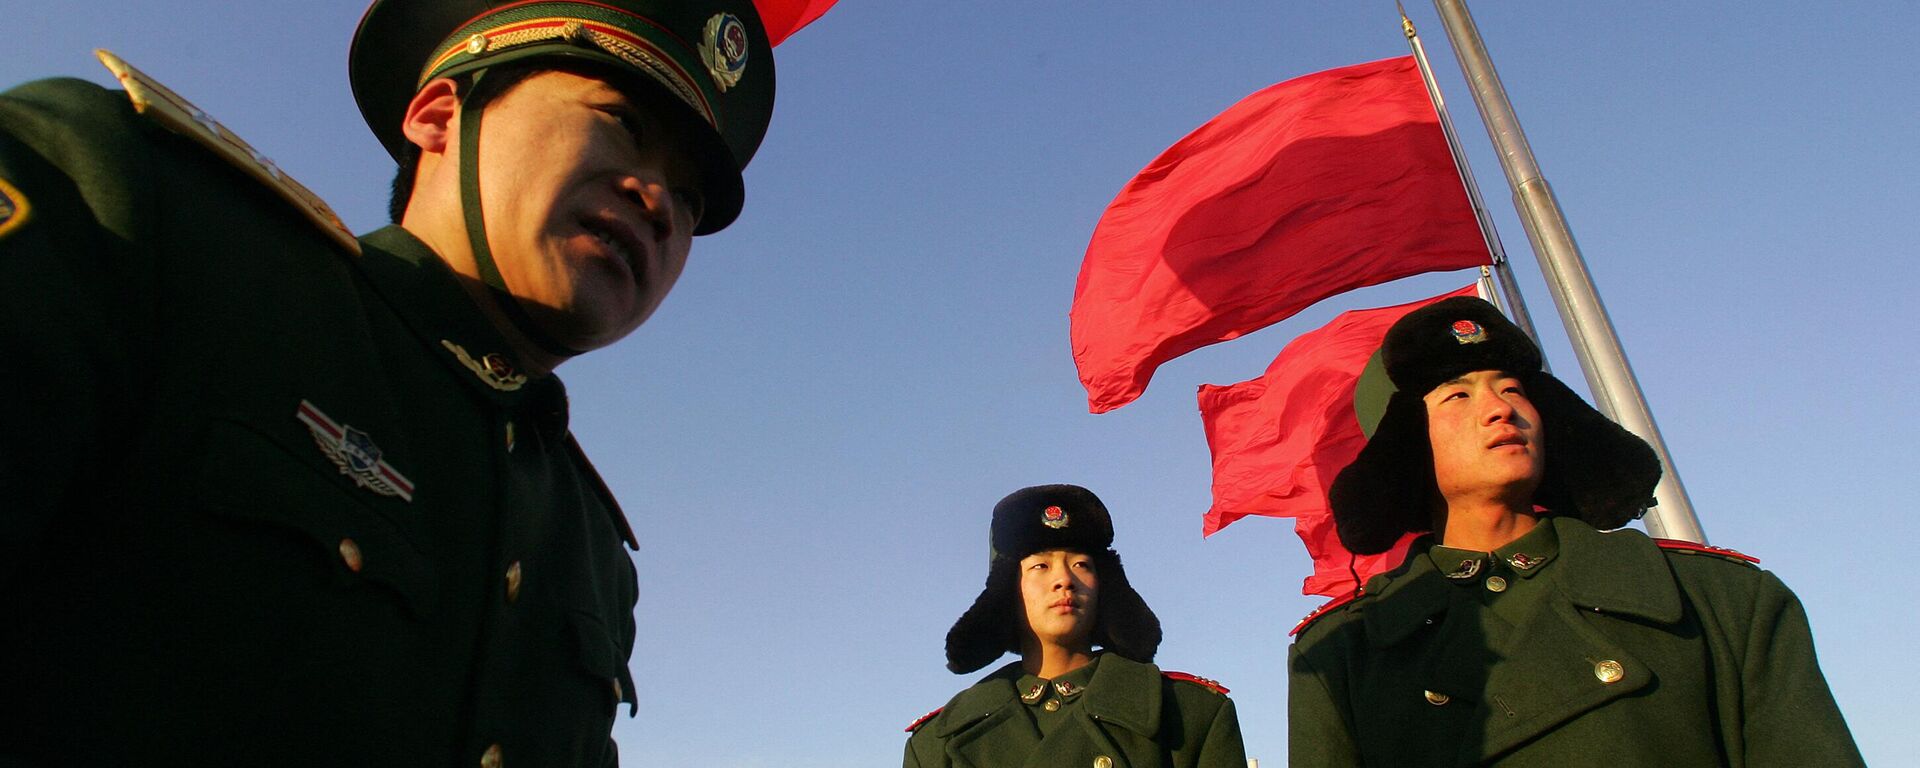 Paramilitary soldiers march beneath red flags on Tiananmen Square for the opening session of China's annual parliament, the National People's Congress (NPC), 05 March 2007 at the Great Hall of the People in Beijing - Sputnik International, 1920, 19.09.2022